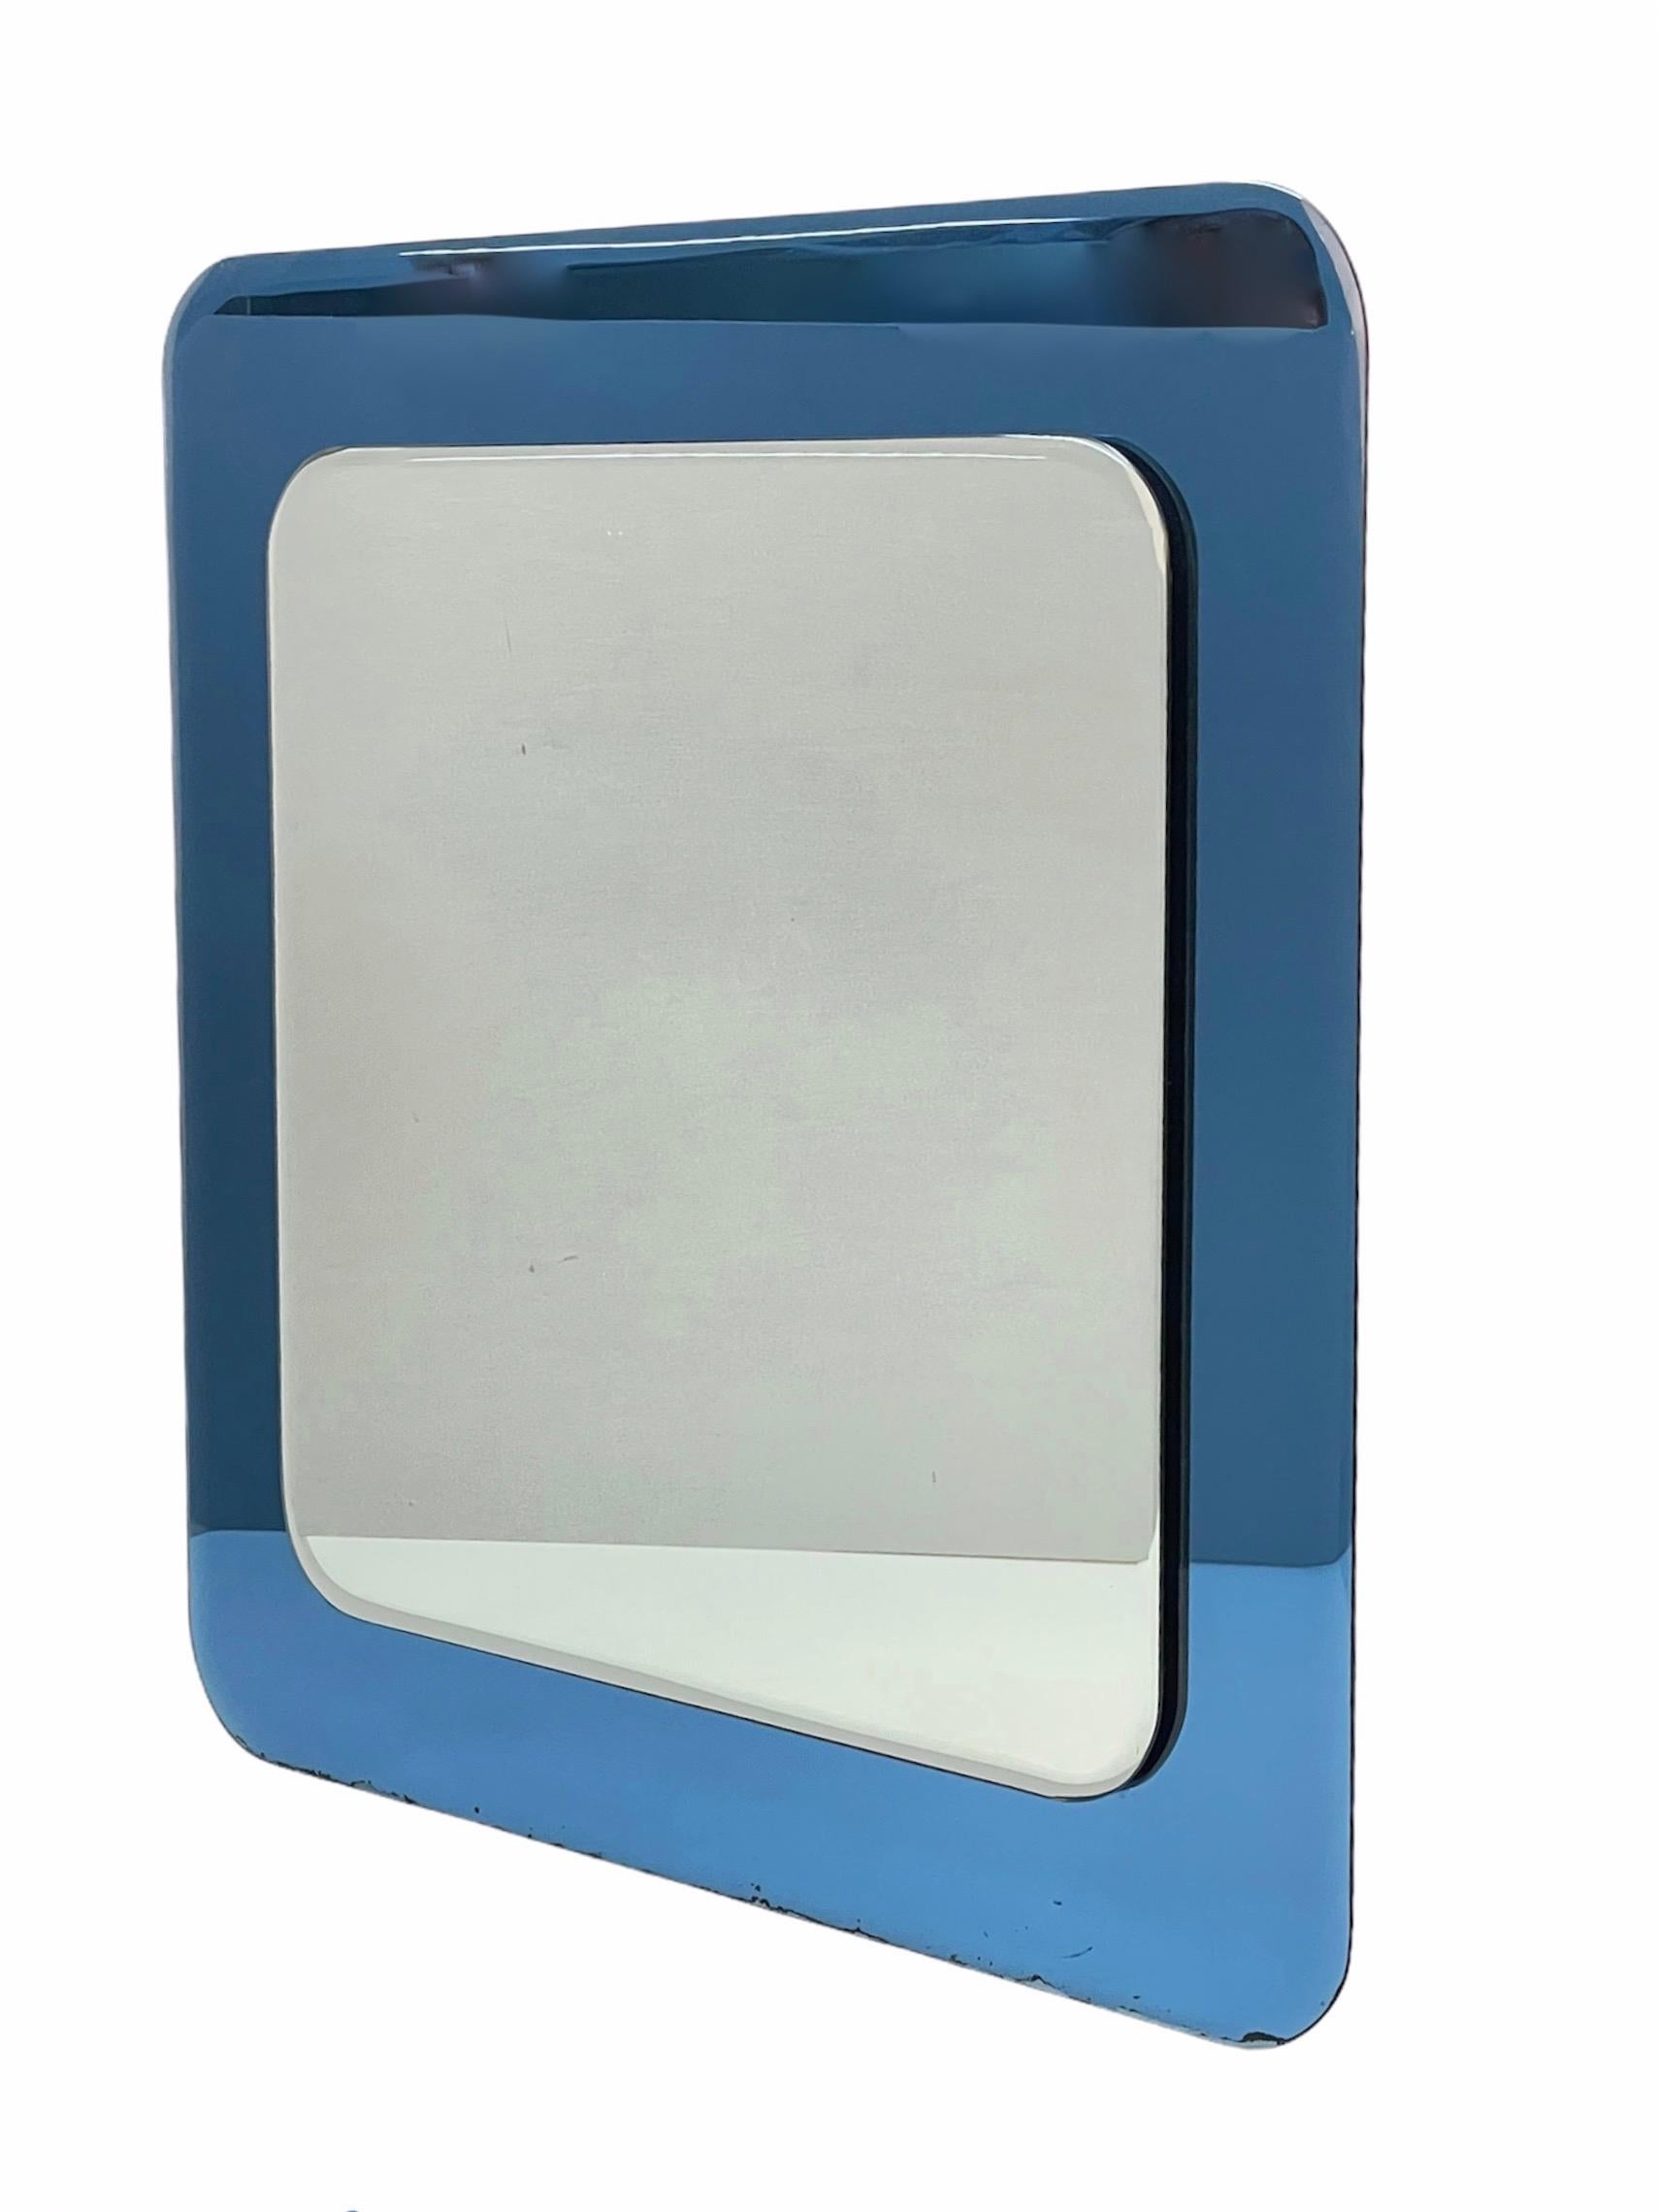 Midcentury Cristal Art Square Italian Wall Mirror with Blue Glass Frame, 1960s For Sale 7